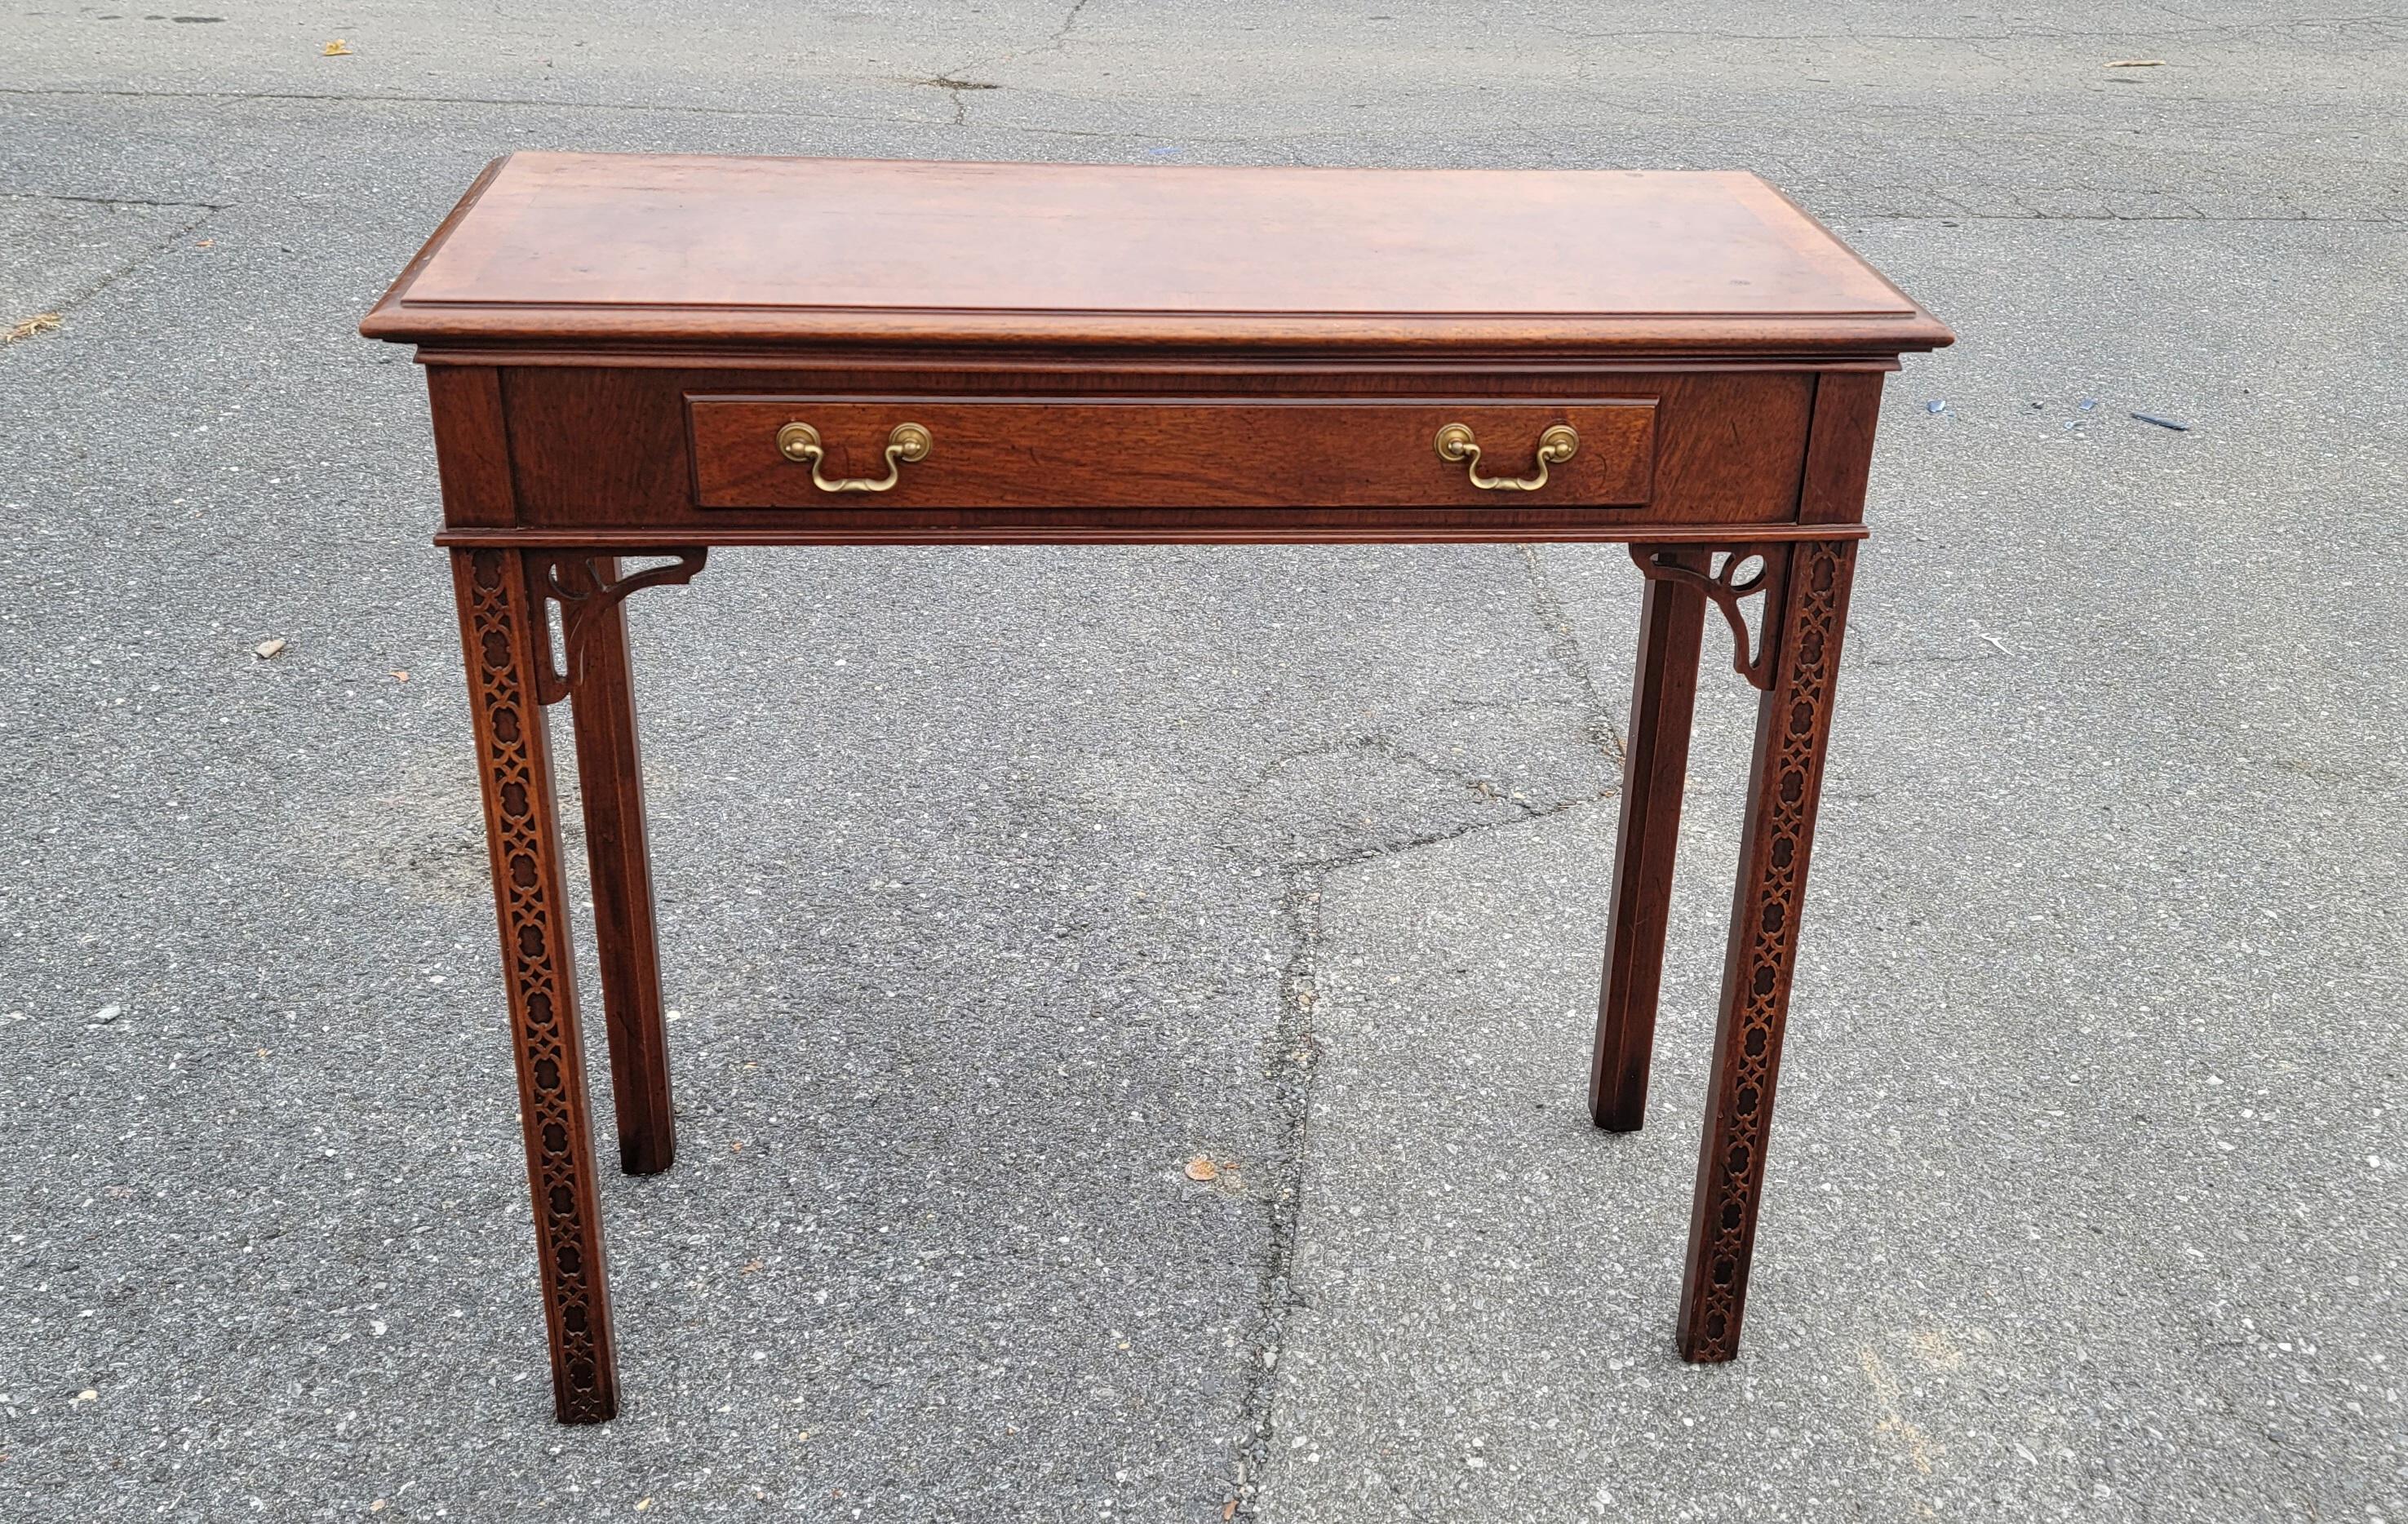 1970s Chippendale Walnut Burl Console Table with Fretwork and Banded Top For Sale 11